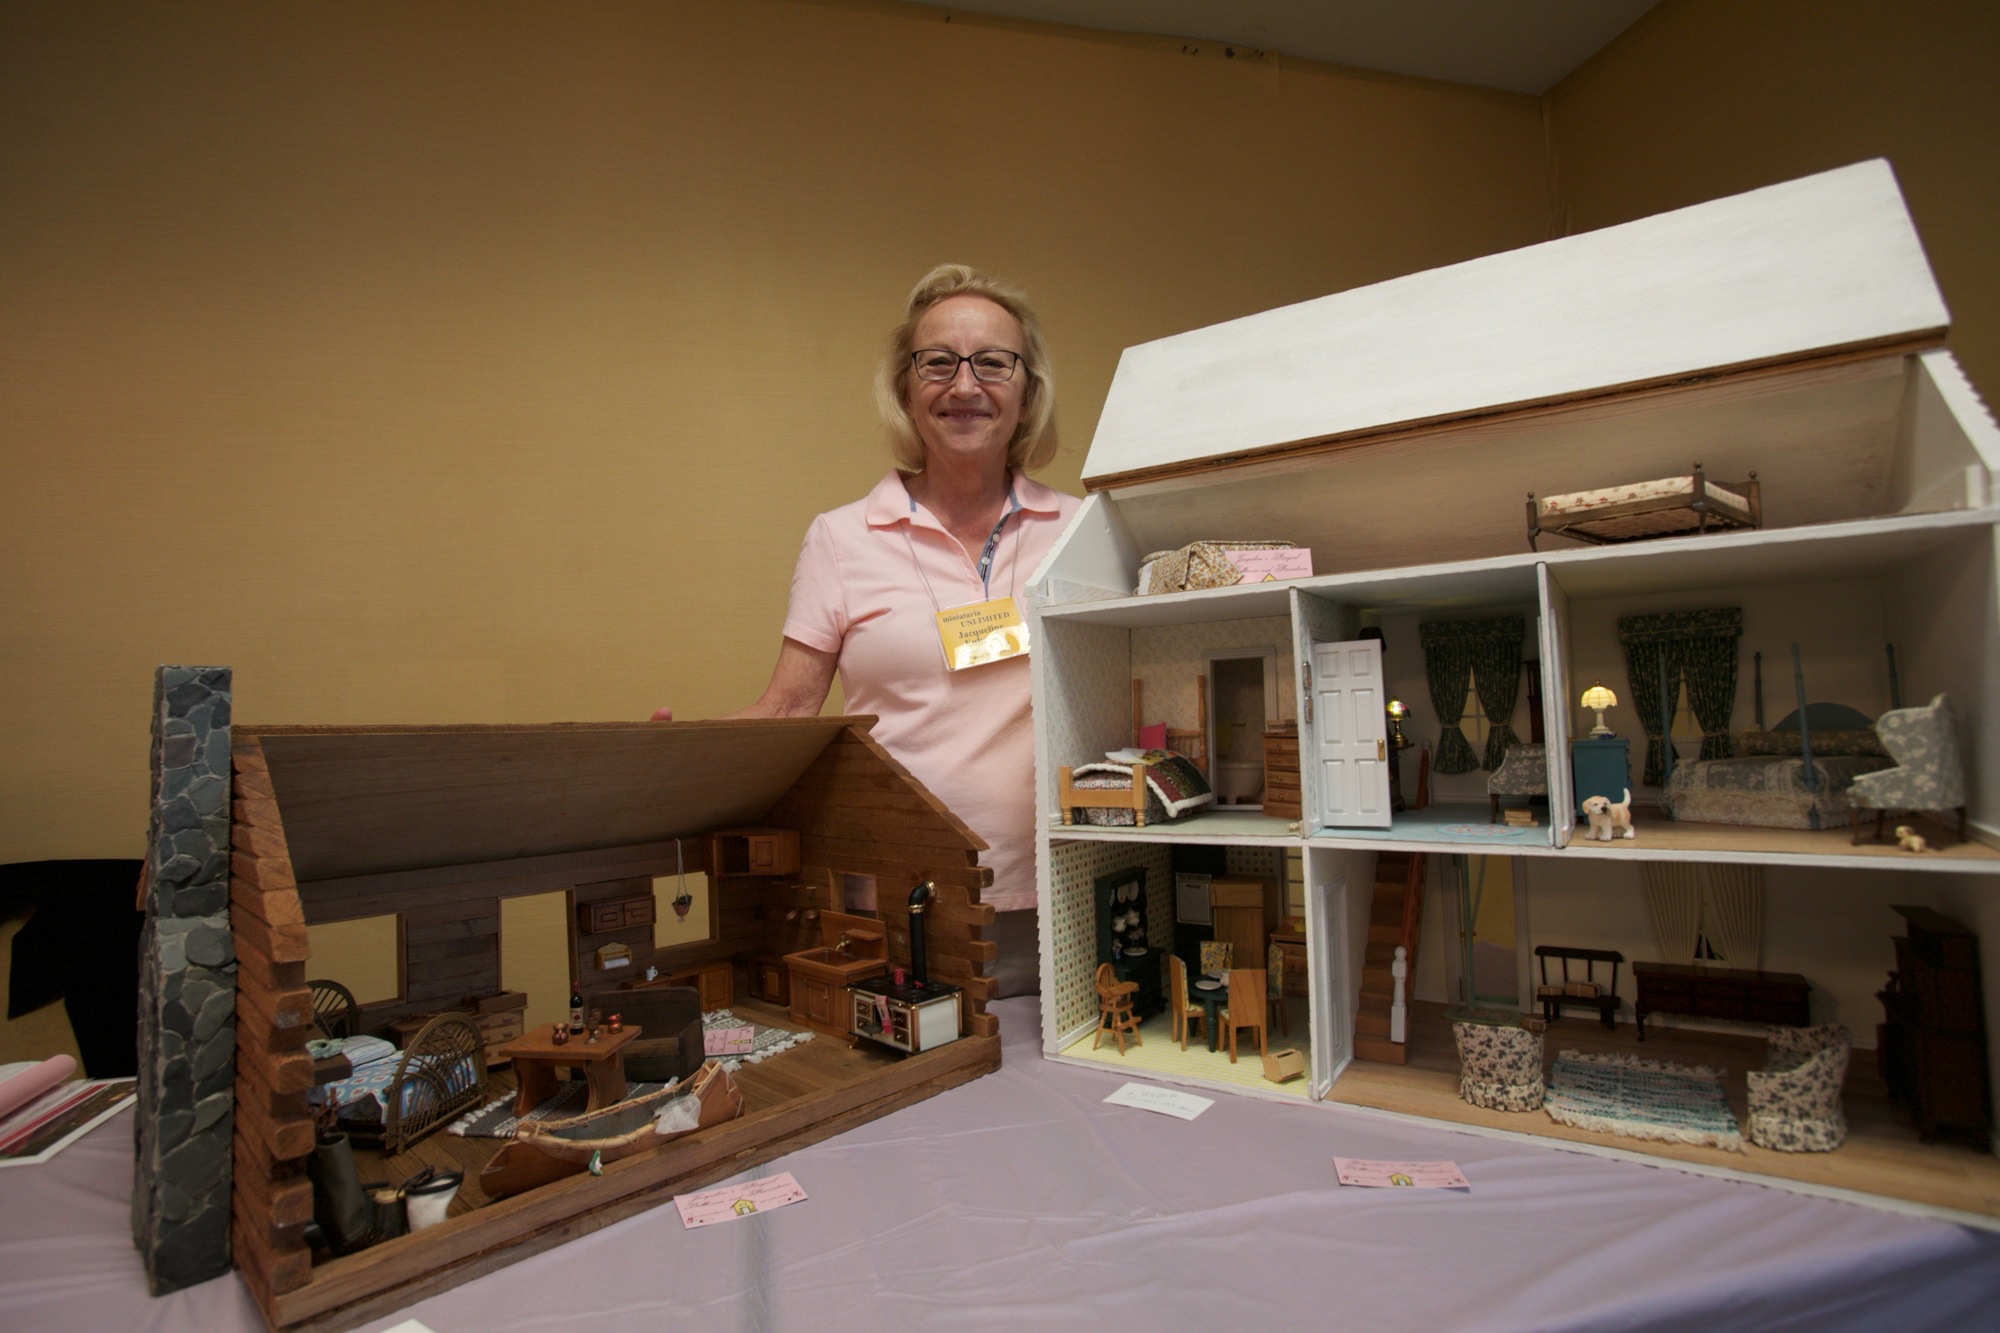 Jacqueline Eubanks enjoys working on the many small details that are needed for her dollhouses.